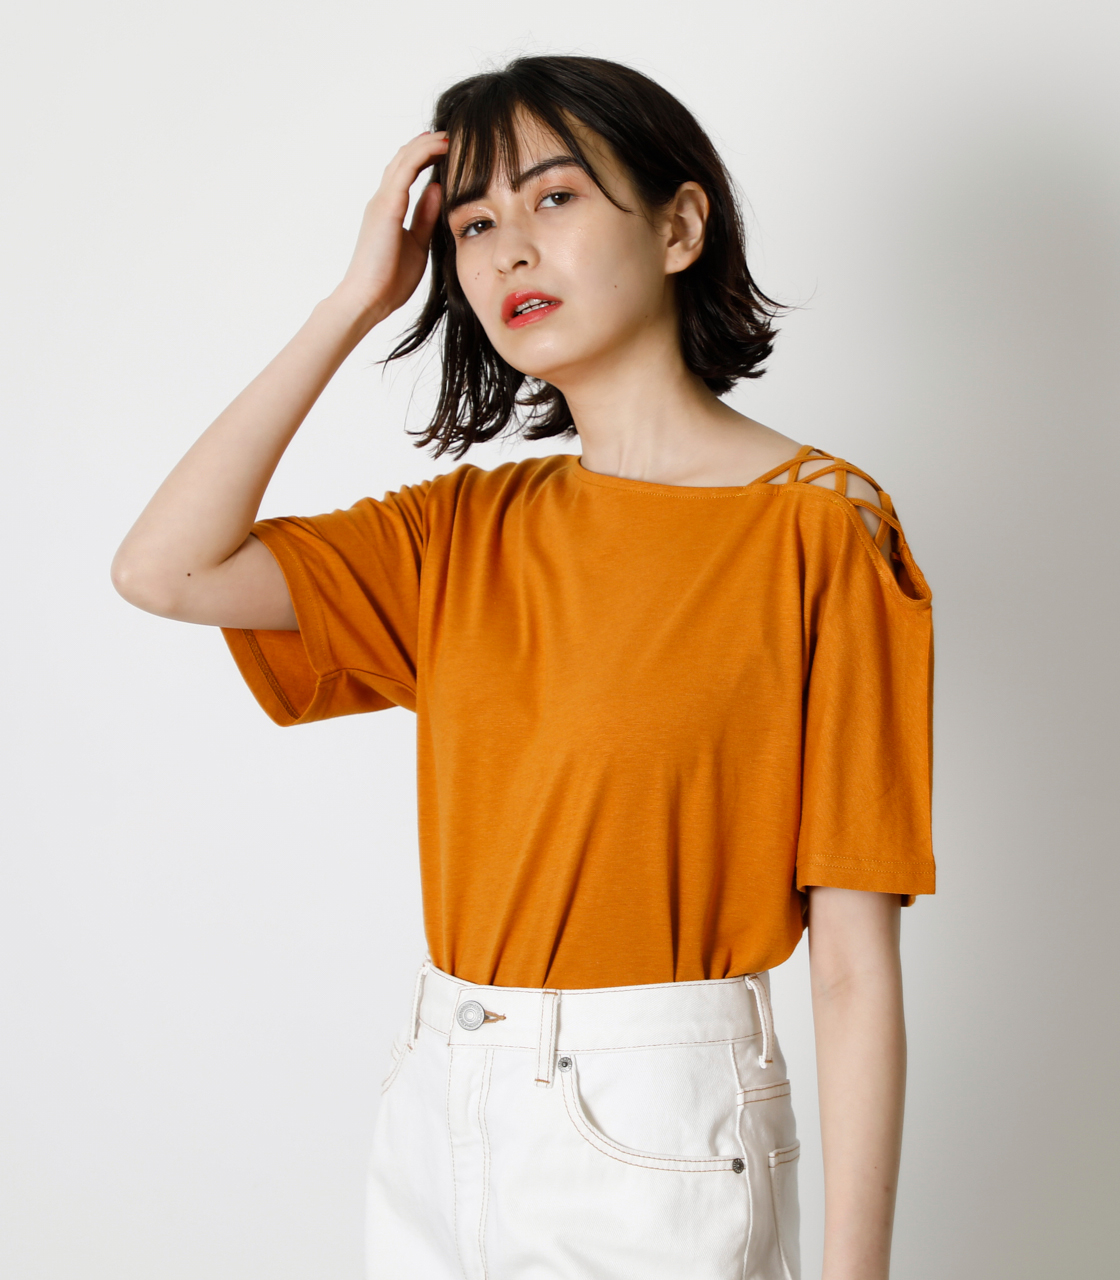 SHOULDER LACE UP TOPS/ショルダーレースアップトップス 詳細画像 D/YEL 1